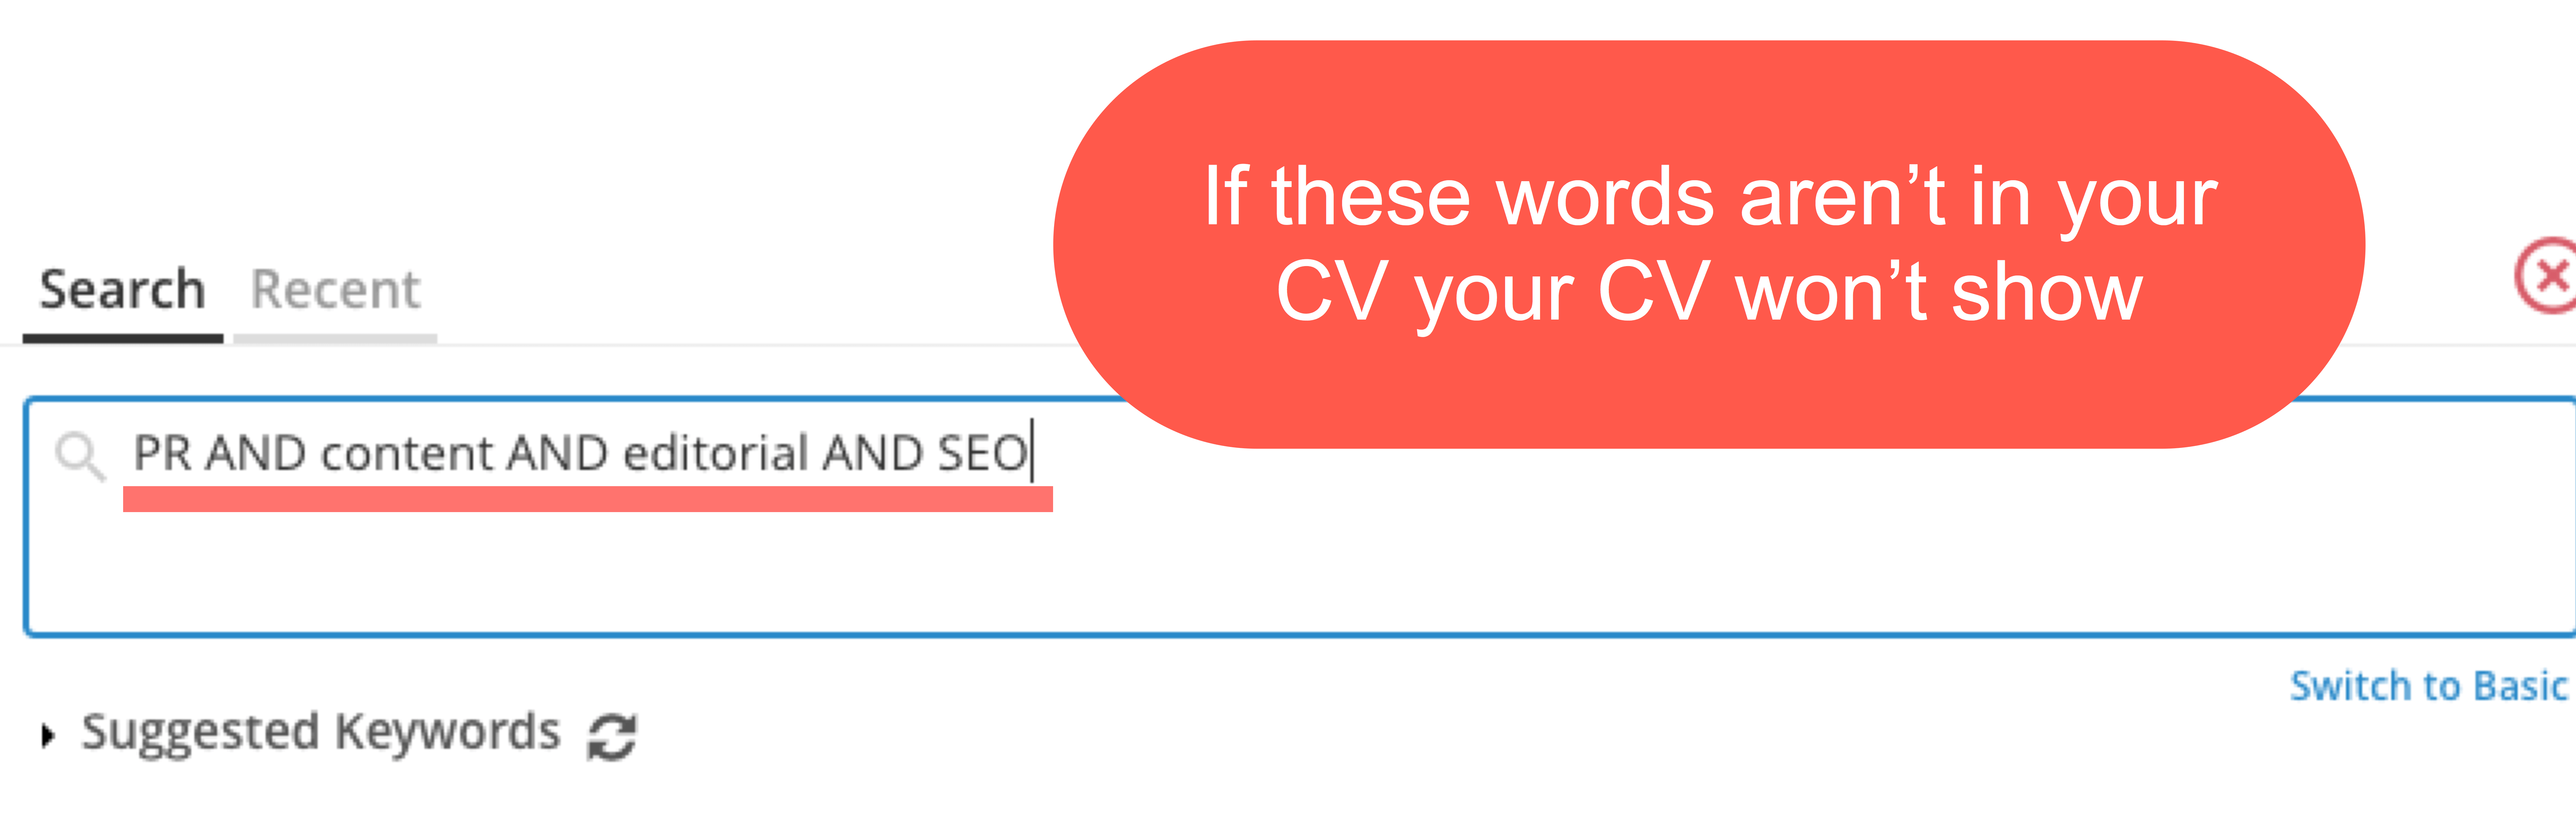 image showing a boolean CV search